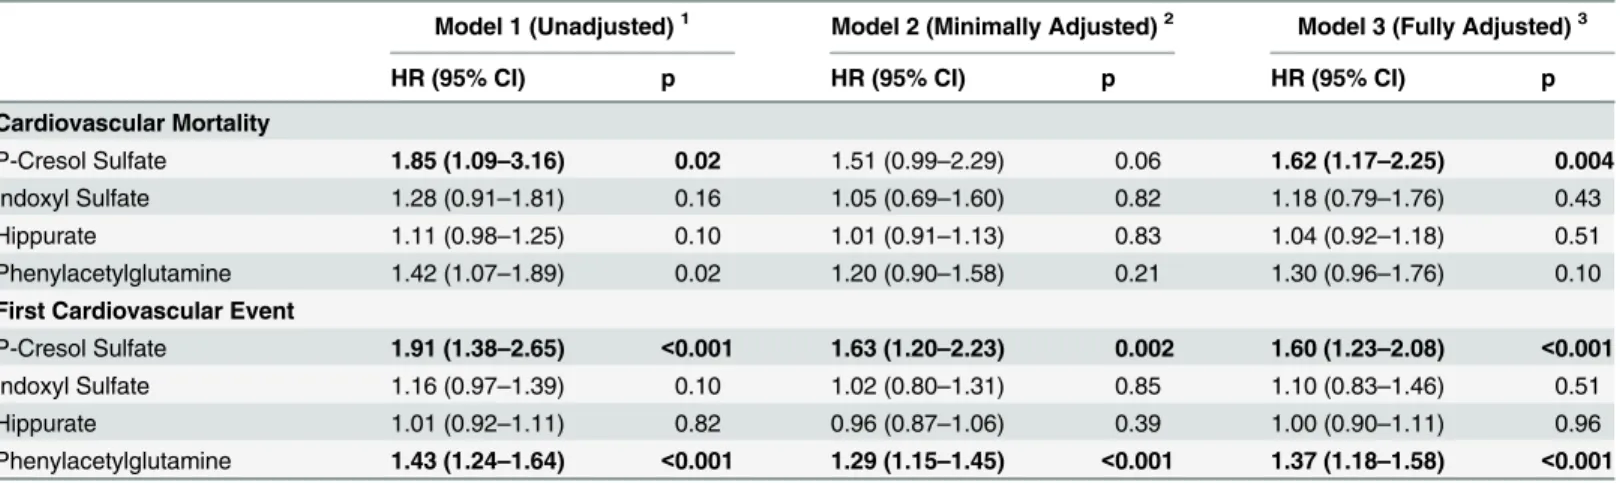 Table 2. Association of Uremic Solutes with Outcomes among 394 Hemodialysis Participants of the CHOICE Study.